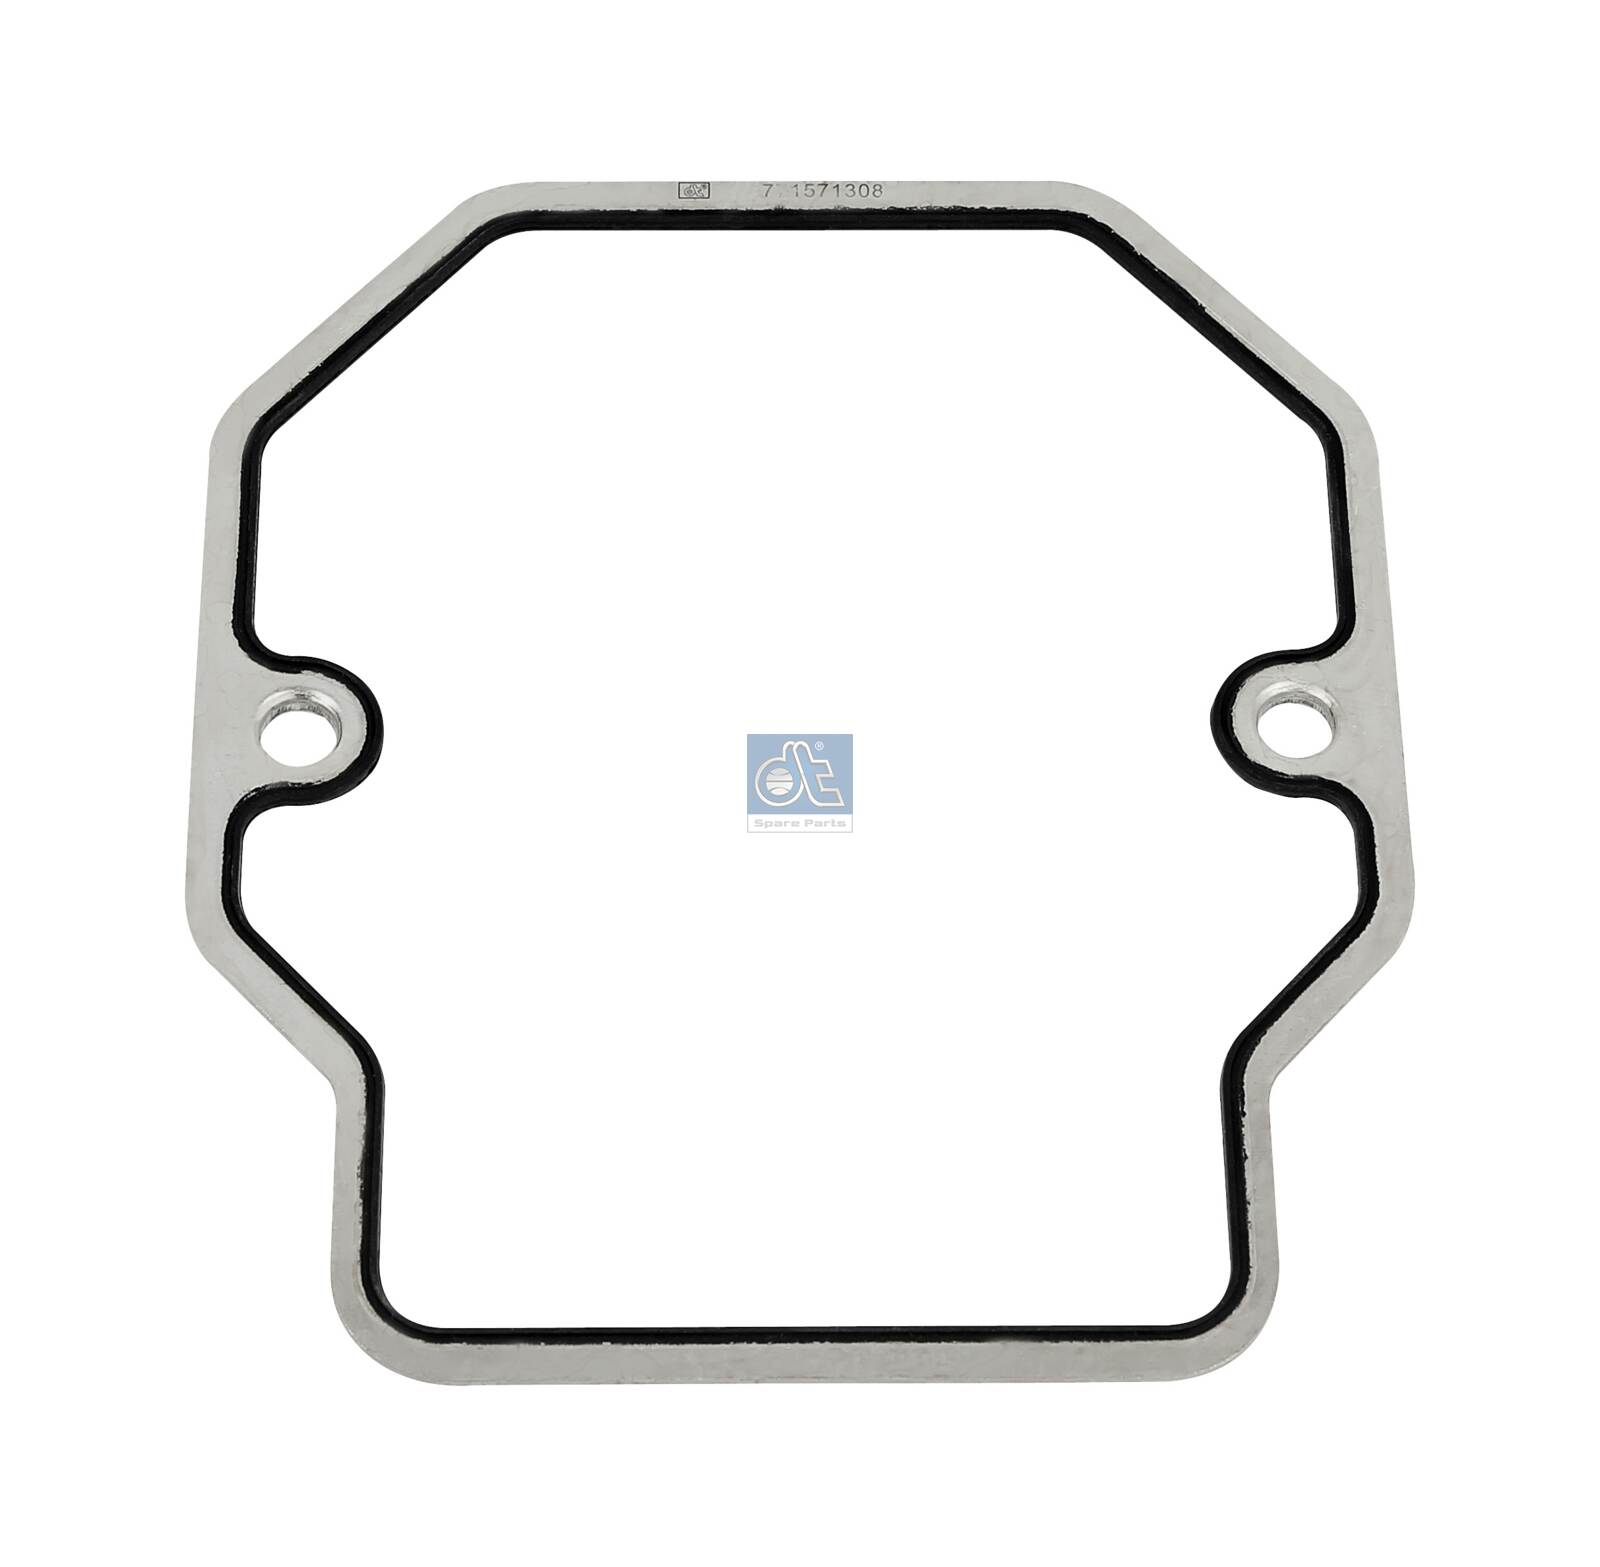 Gasket, cylinder head cover - 3.12112 DT Spare Parts - 51039050157, 51.03905.0157, 023.342